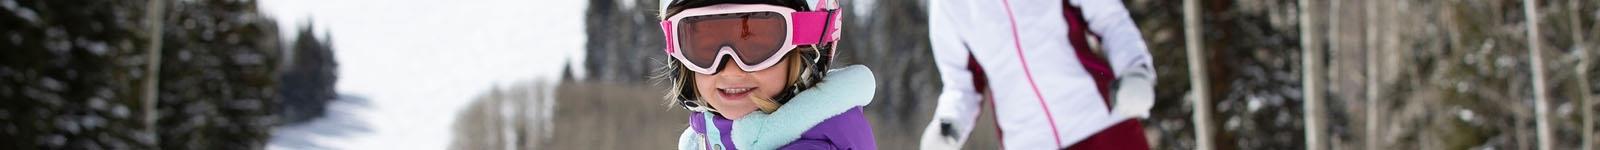 Oakley Ski Goggles for Kids (Ages 6-16) 